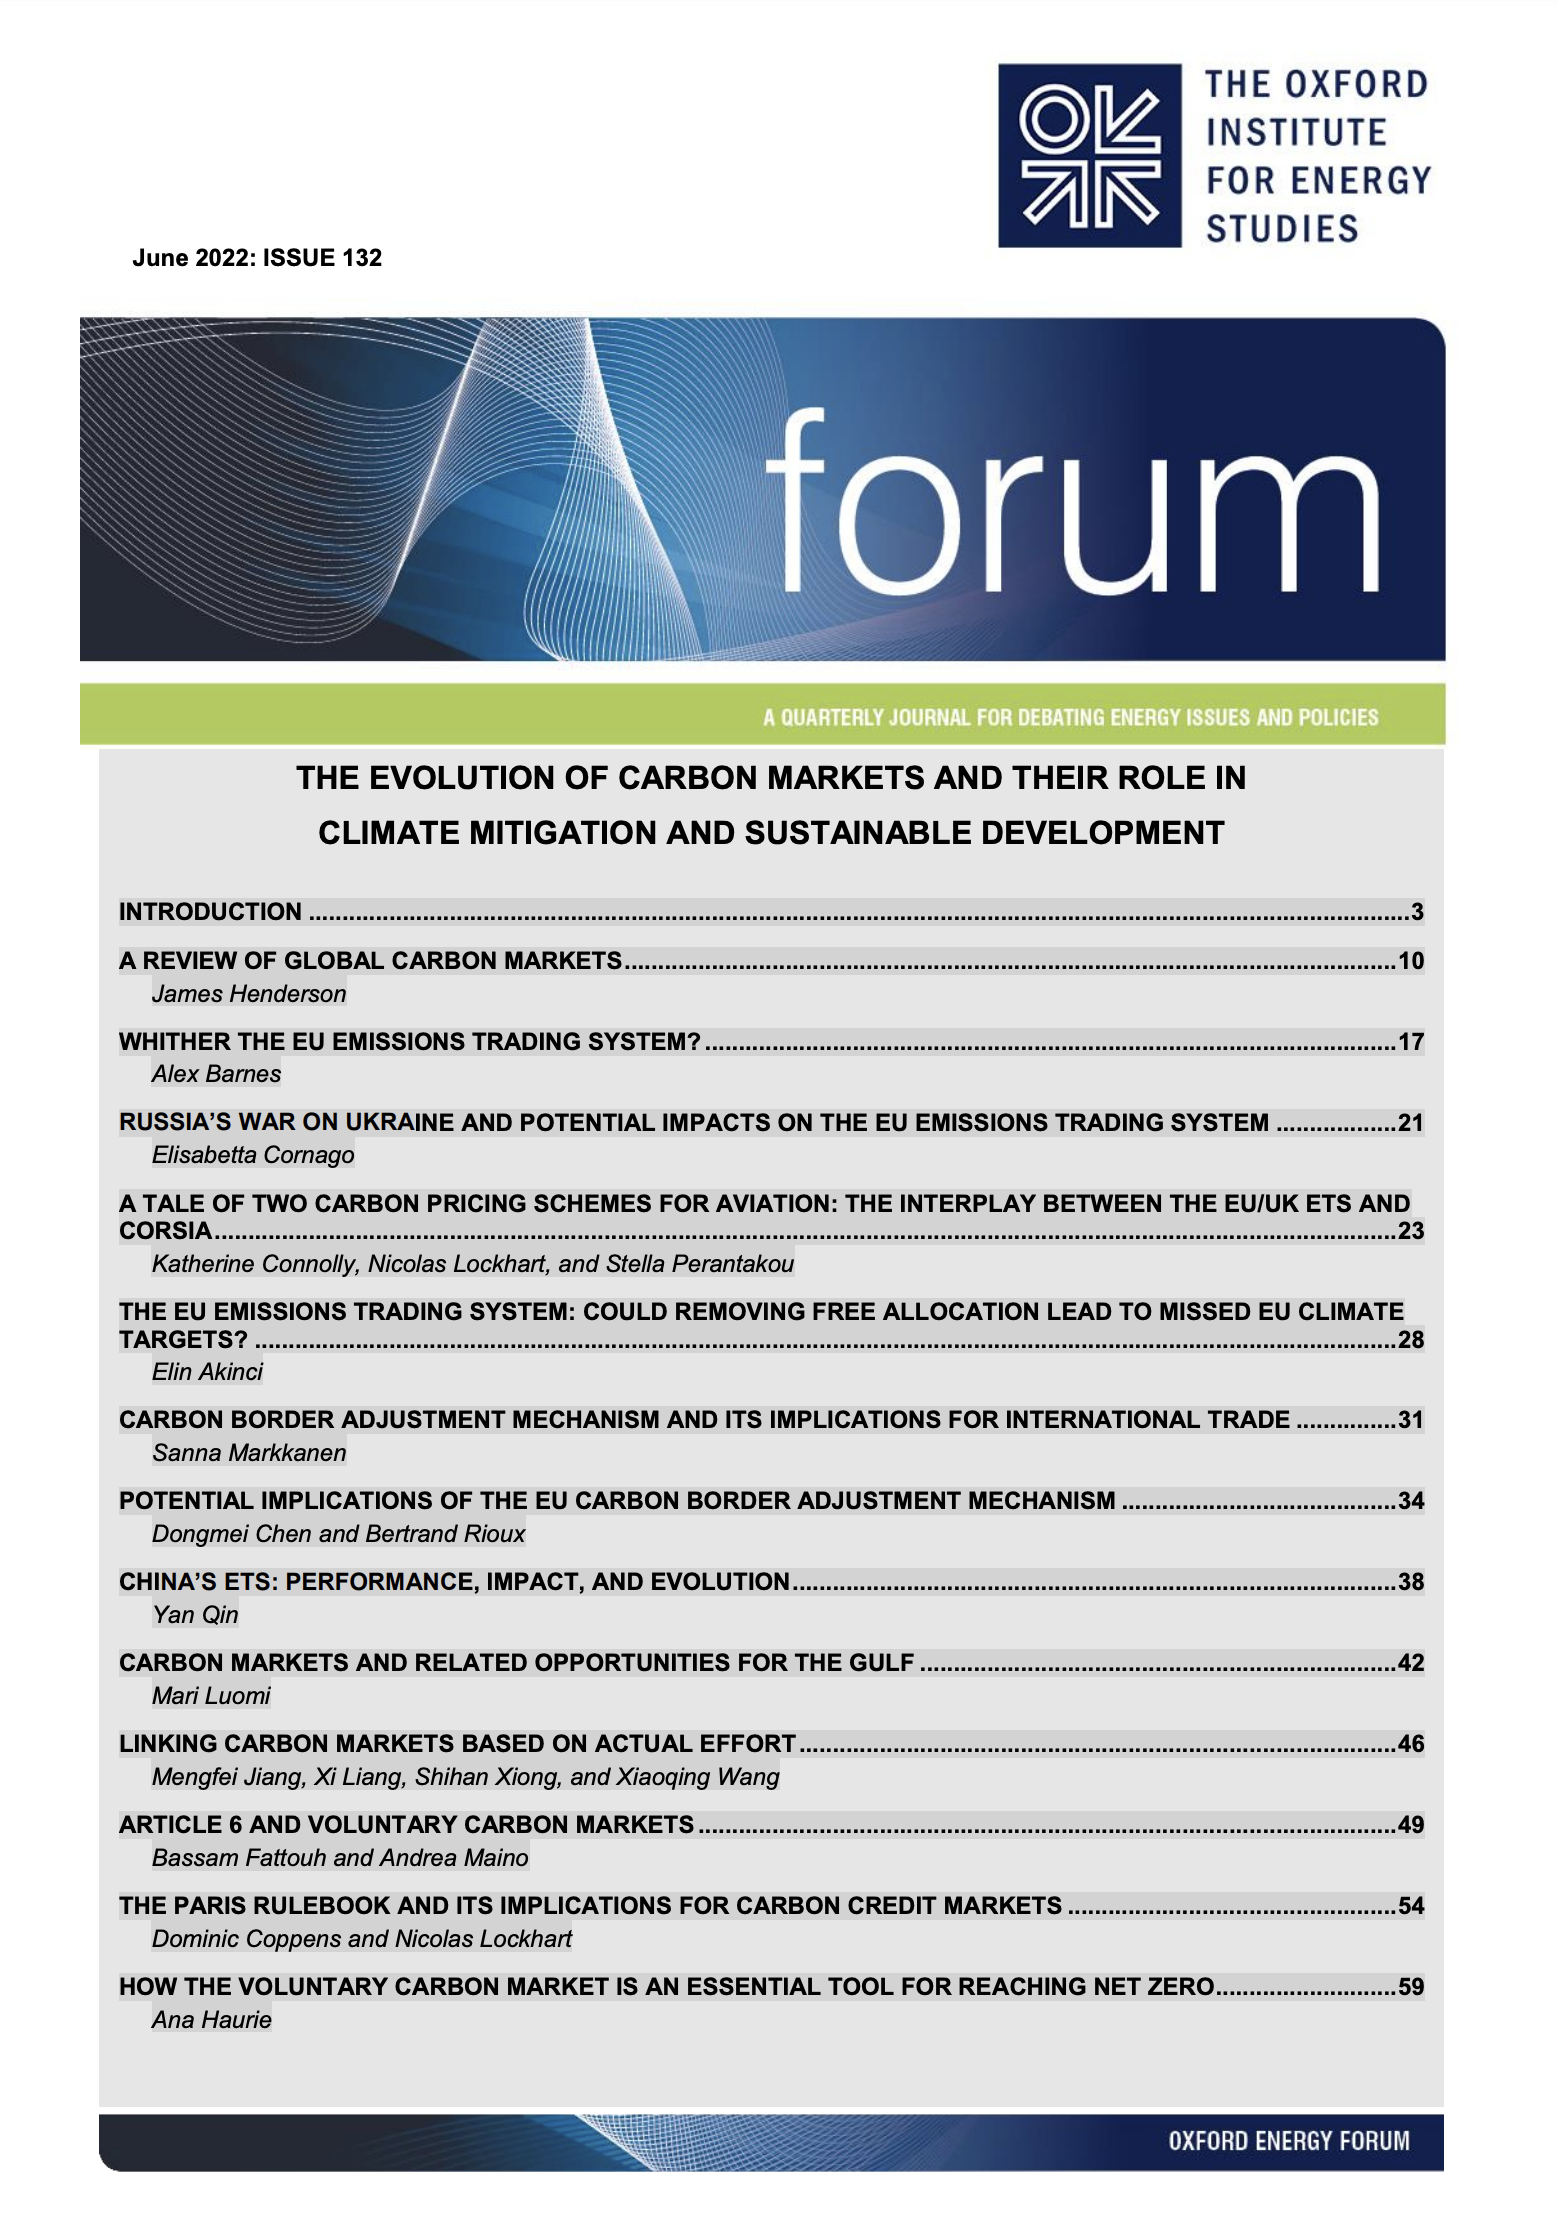 New Oxford Energy Forum – The Evolution of Carbon Markets and their Role in Climate Mitigation and Sustainable Development – Issue 132